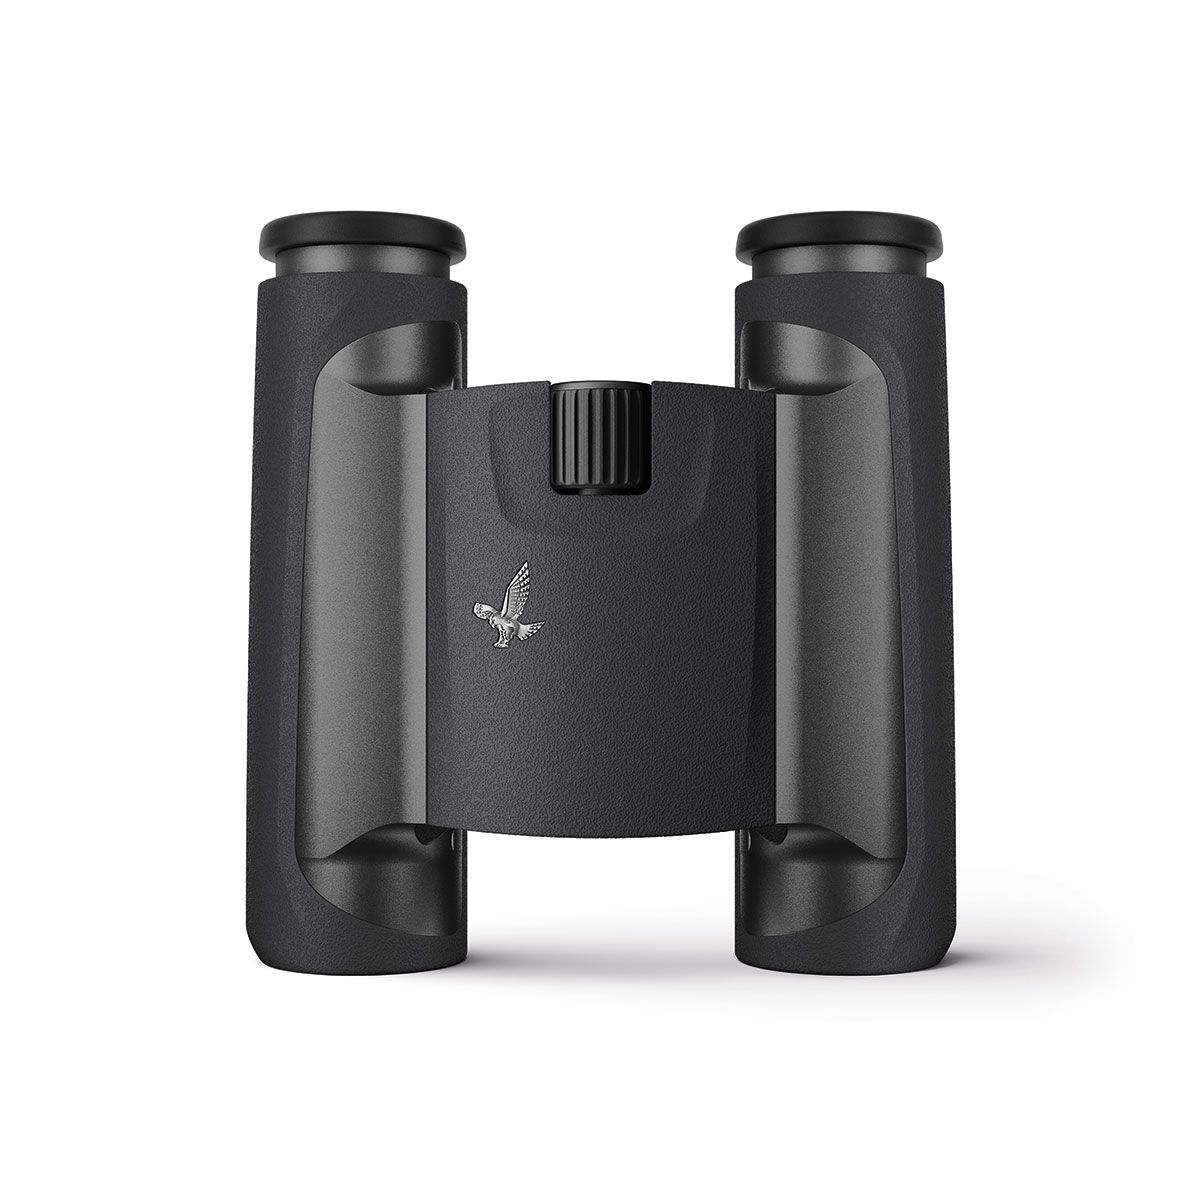 Swarovski CL 8x25 Pocket Binoculars Anthracite with Mountain Accessory Pack - Product Photo 3 - High resolution photo of the binoculars from a top down perspective and extended to their full range